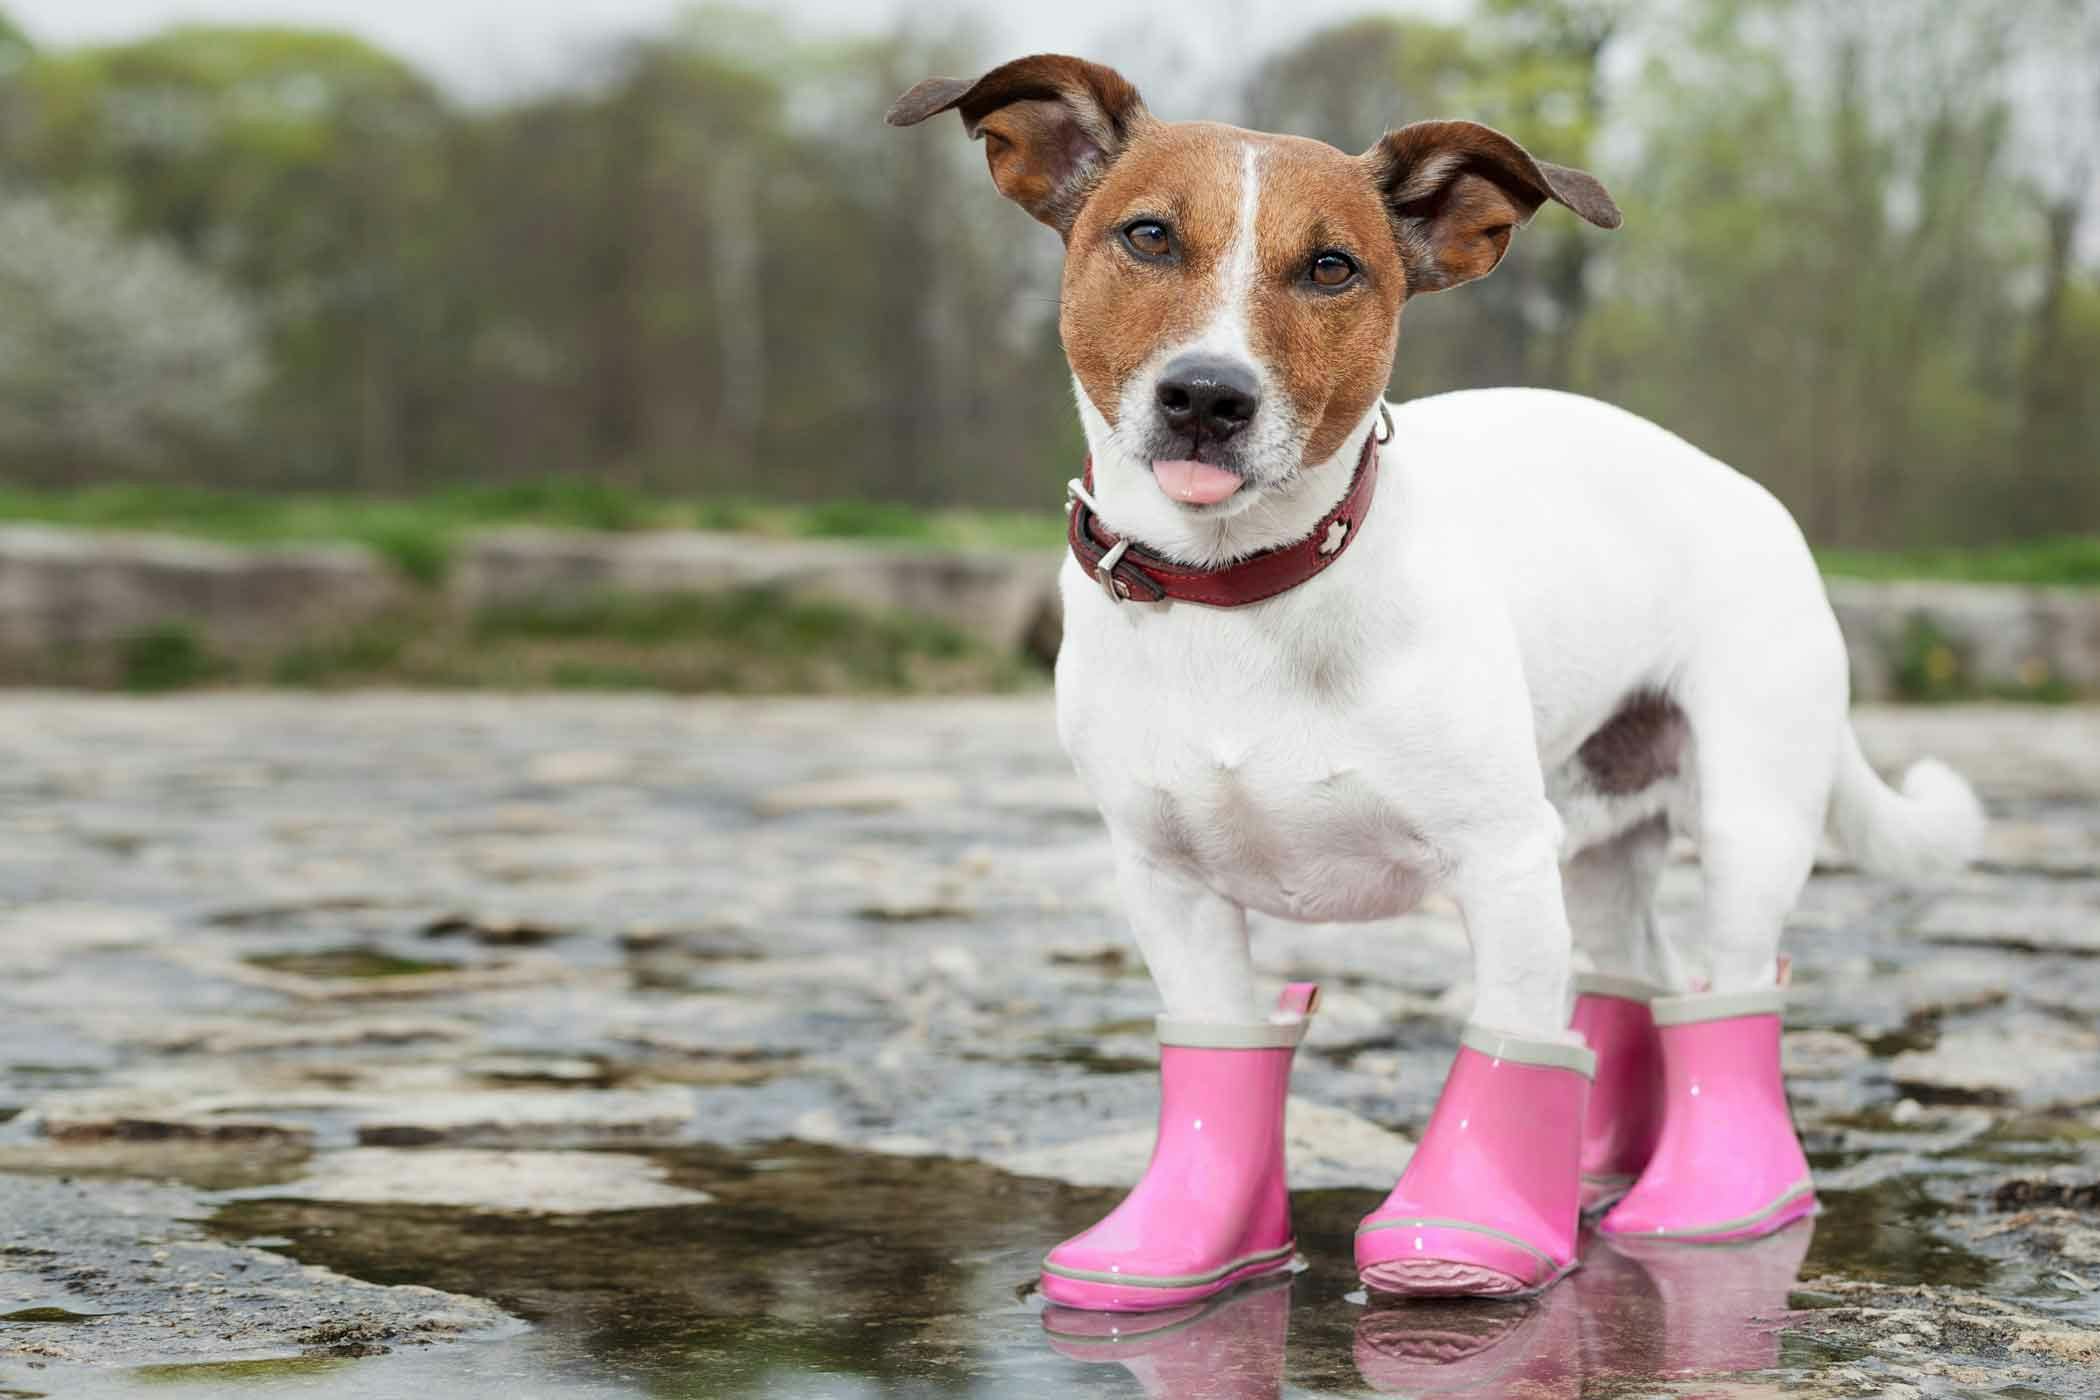 How to Train Your Dog to Wear Boots | Wag!